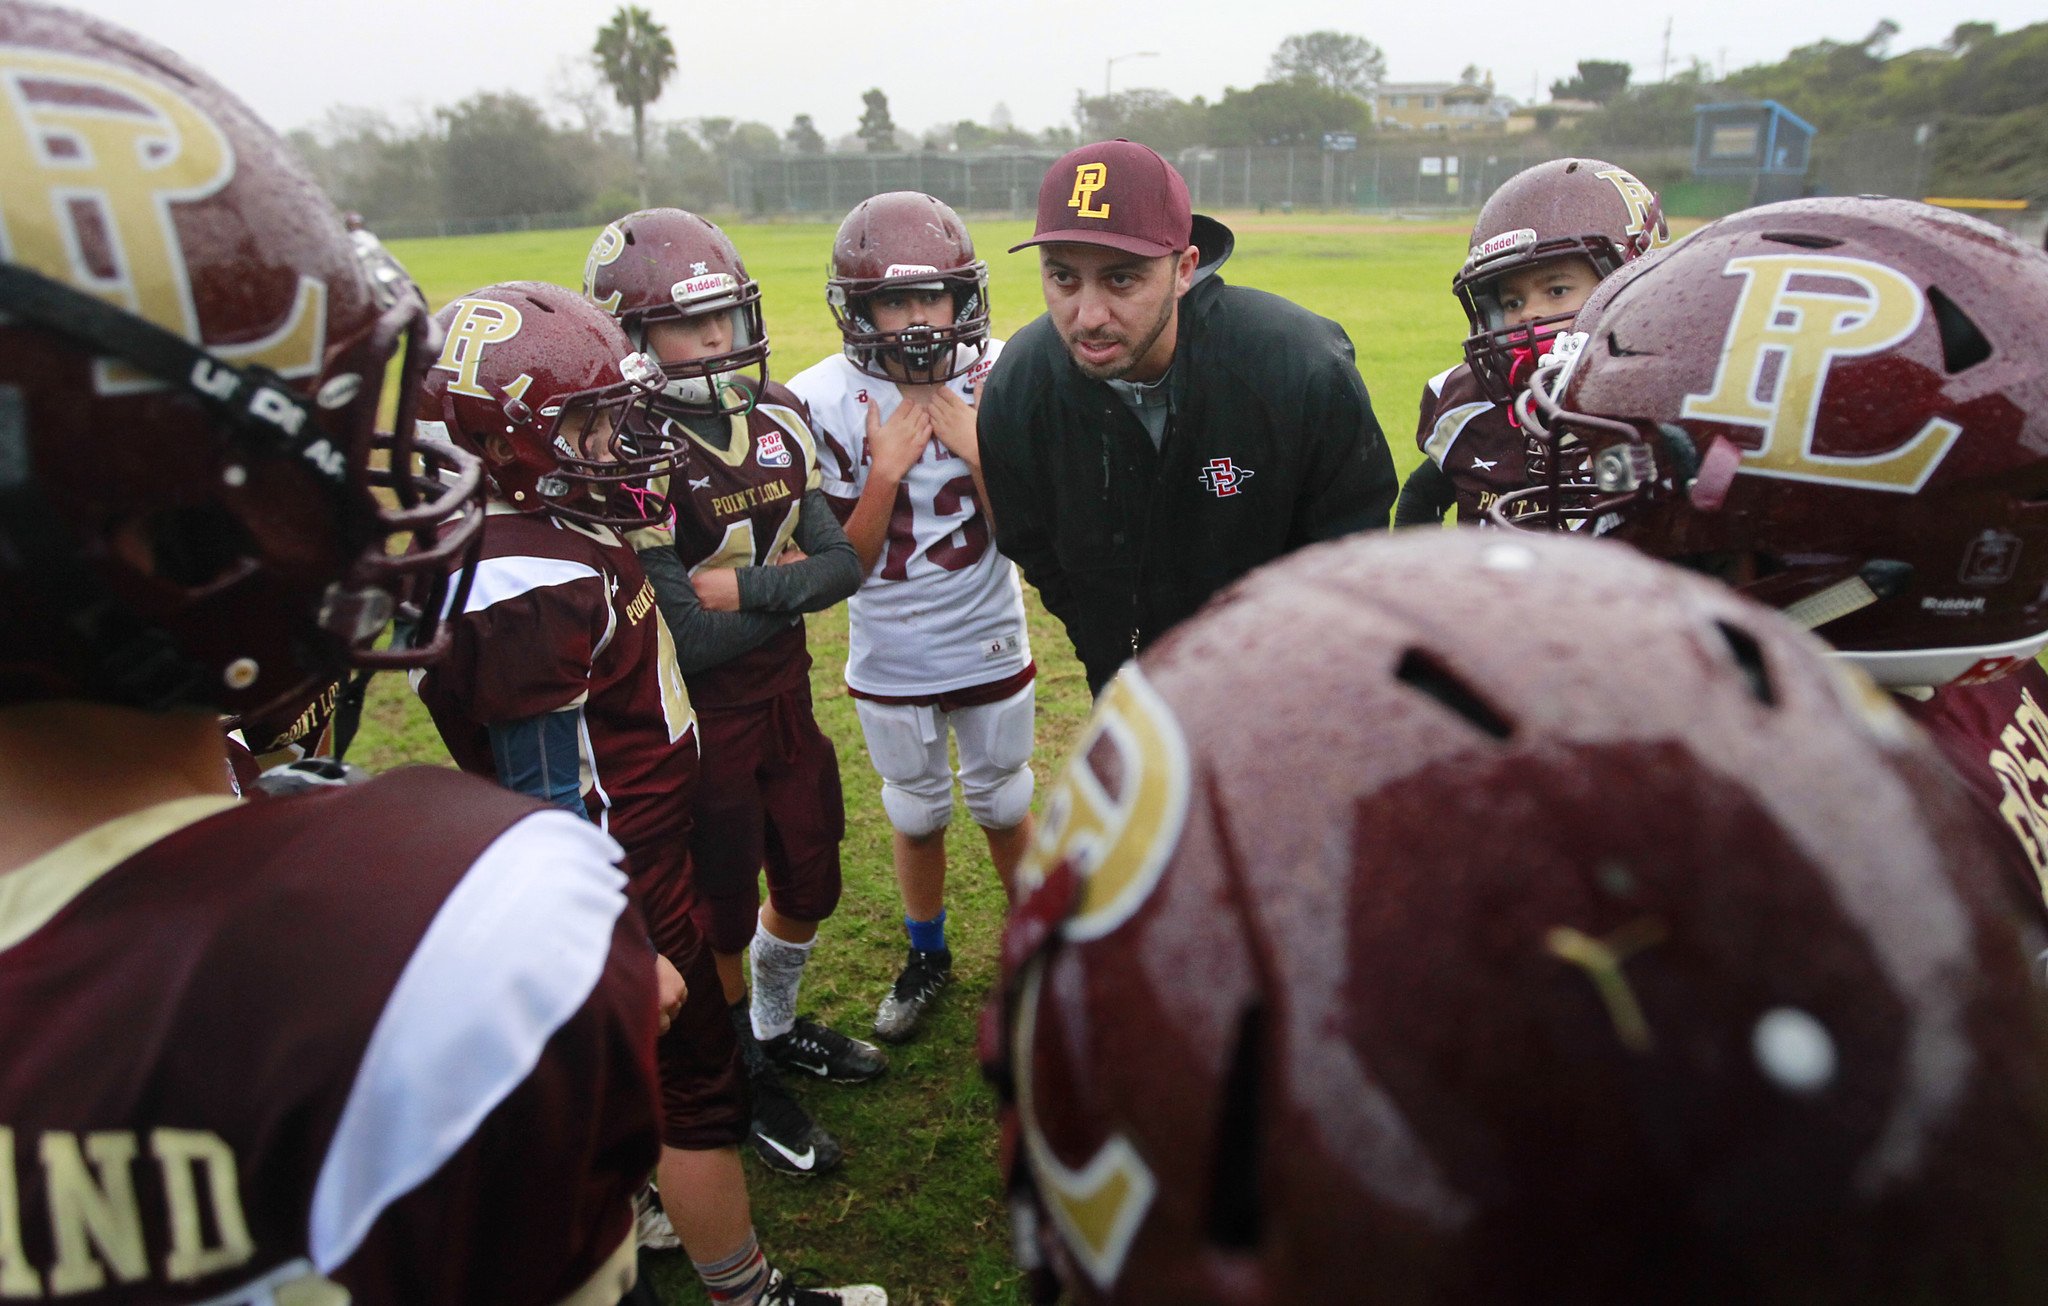 Former Aztec has Point Loma Pop Warner prepped for Super Bowl - The San Diego Union-Tribune